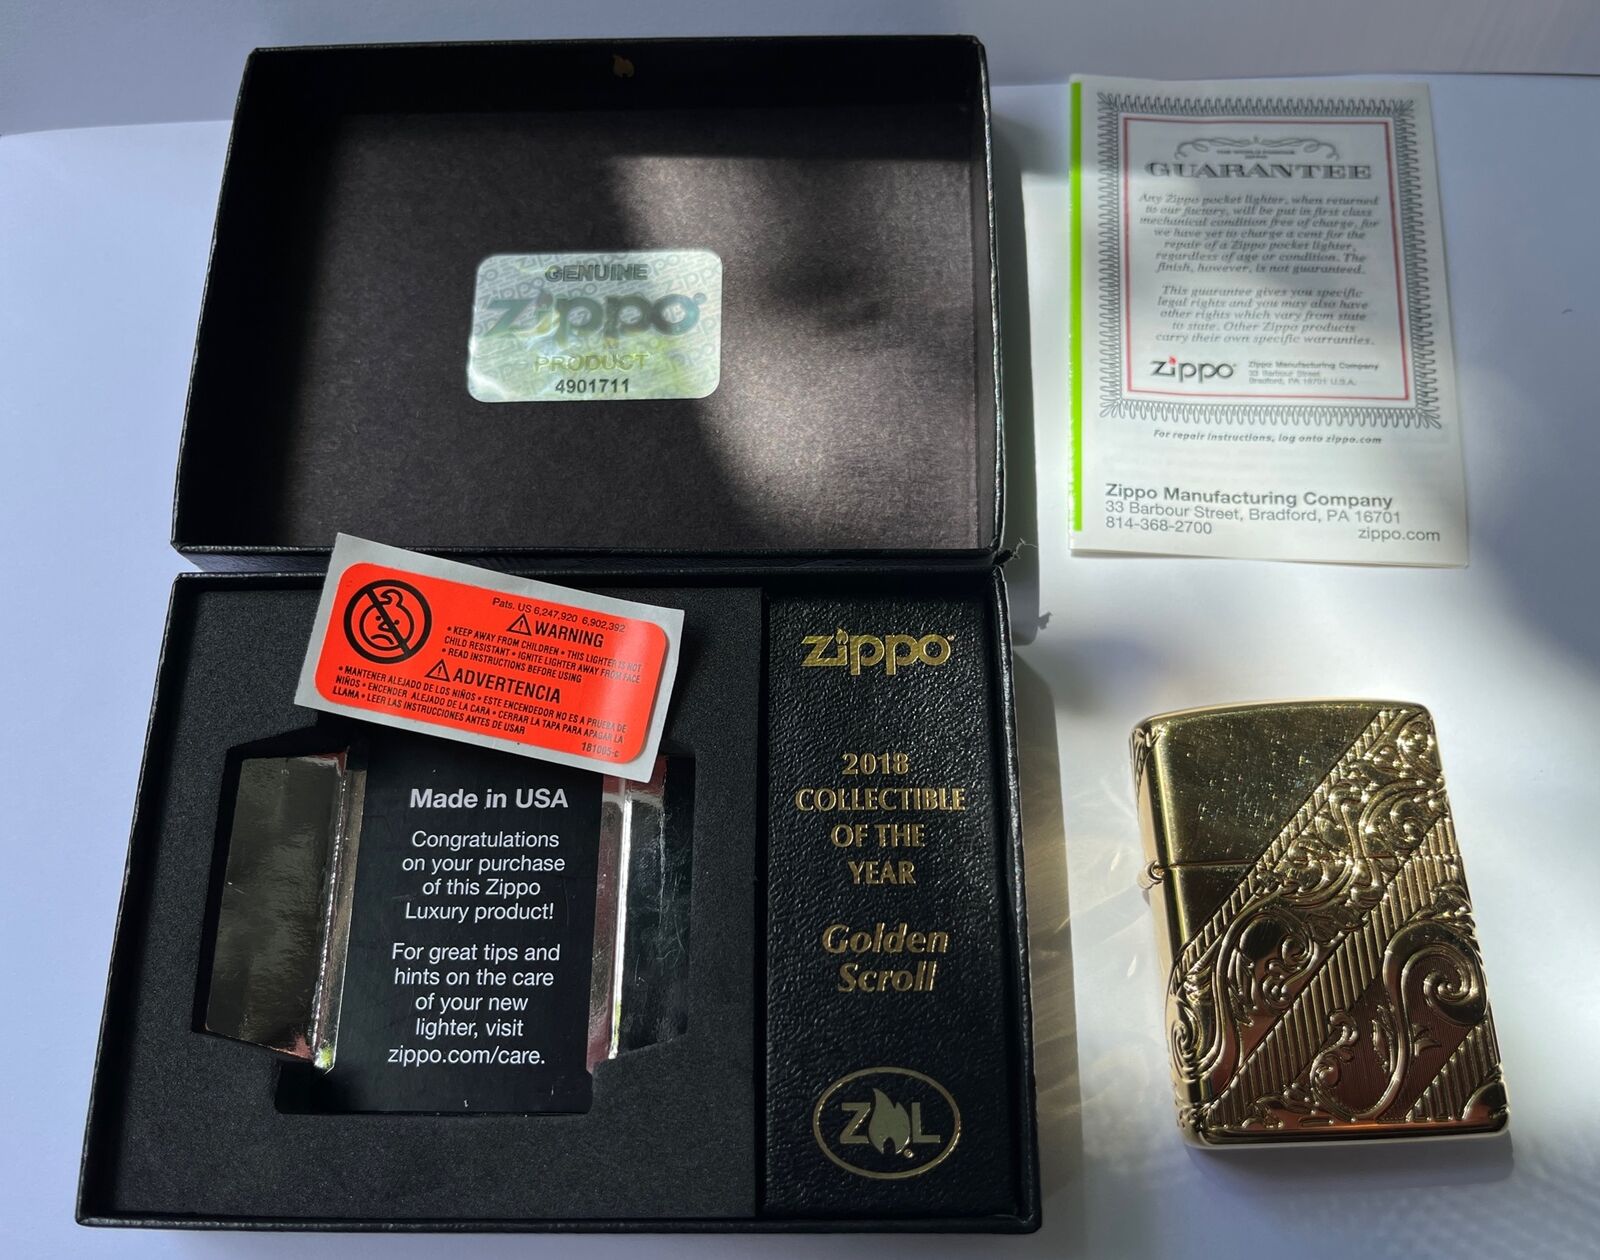 NEW ZIPPO 2018 COLLECTIBLE OF THE YEAR GOLDEN SCROLL GOLD PLATED LIMITED EDITION